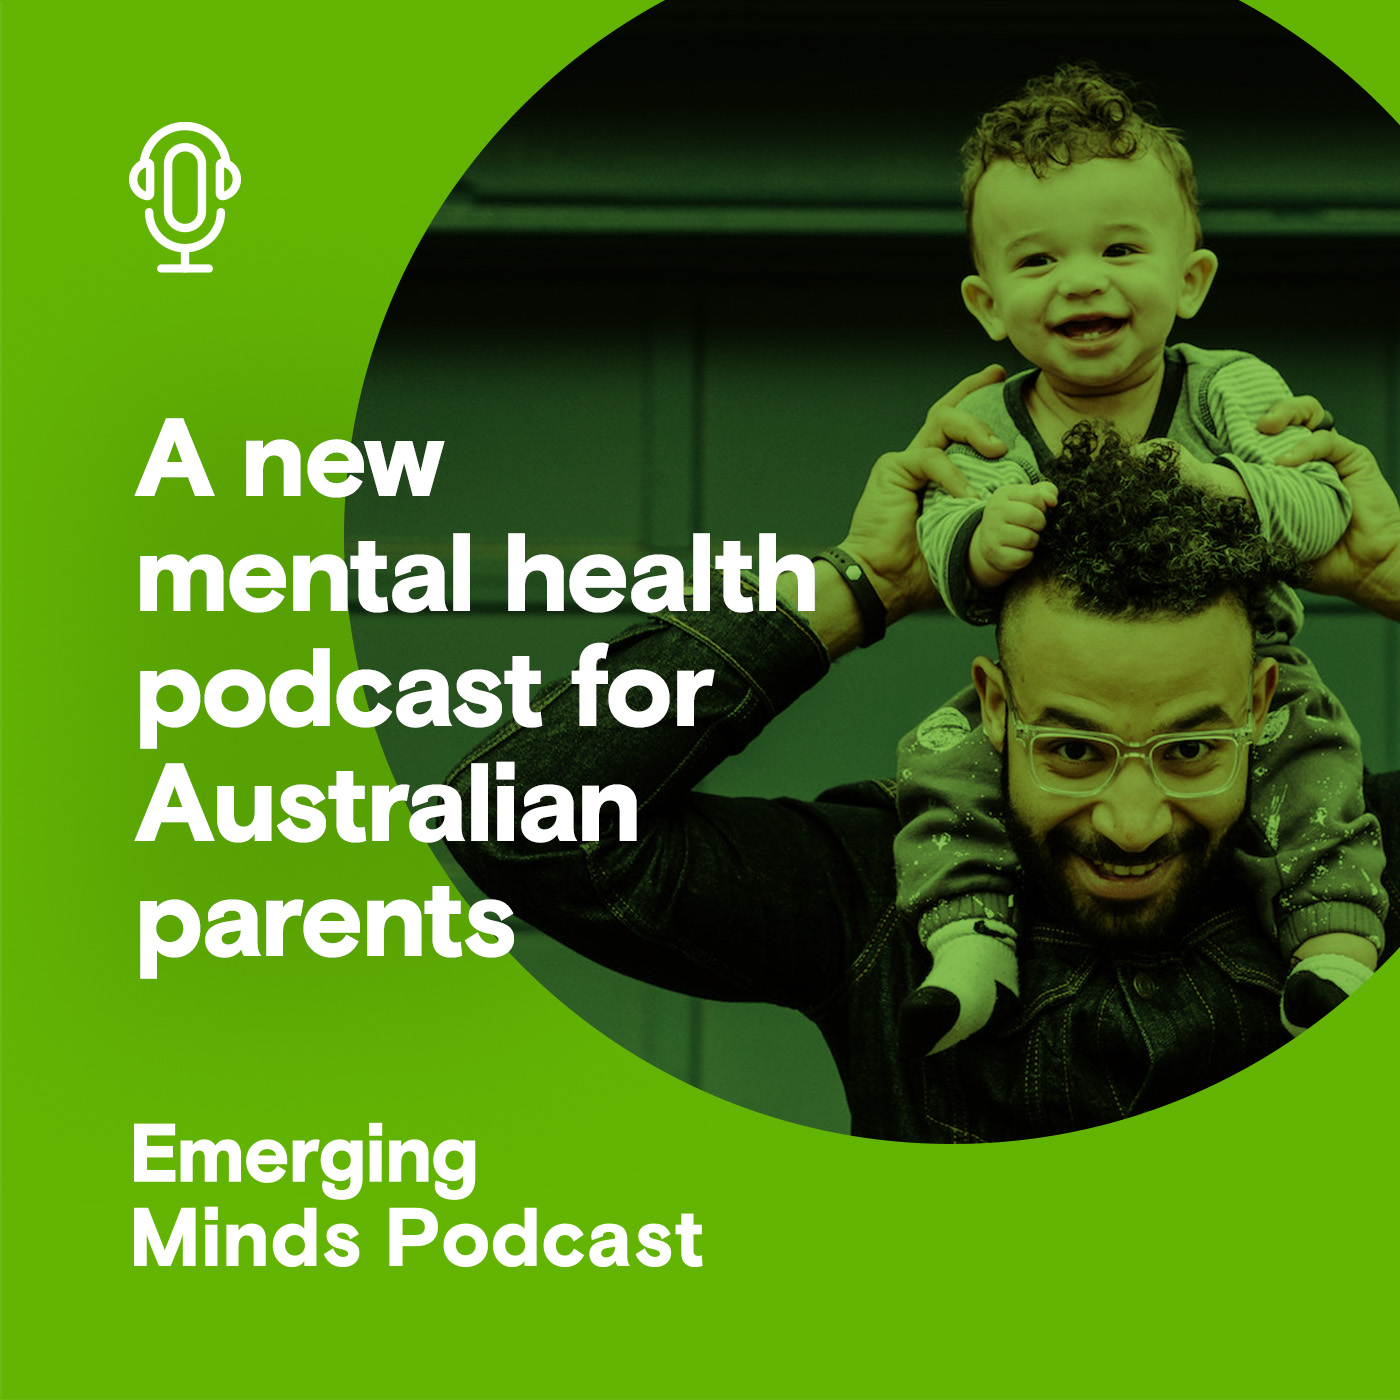 A new mental health podcast for Australian parents